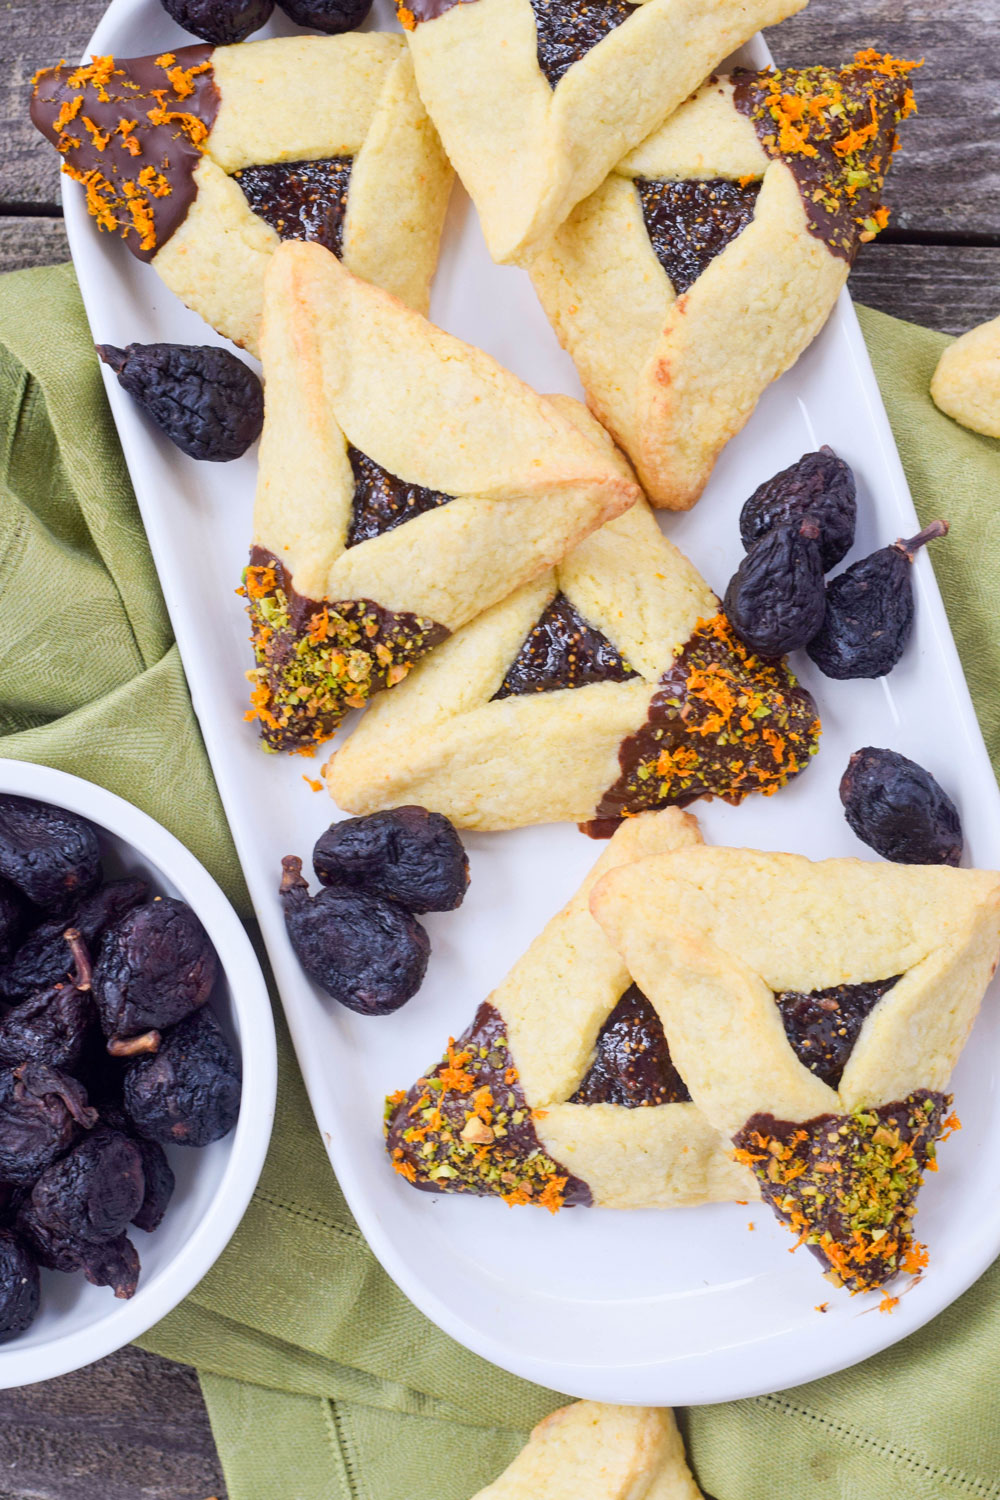 When Purim comes along, the first thing we want to bake is fig hamantaschen. Look no further for easy hamentaschen recipes filled with figs.